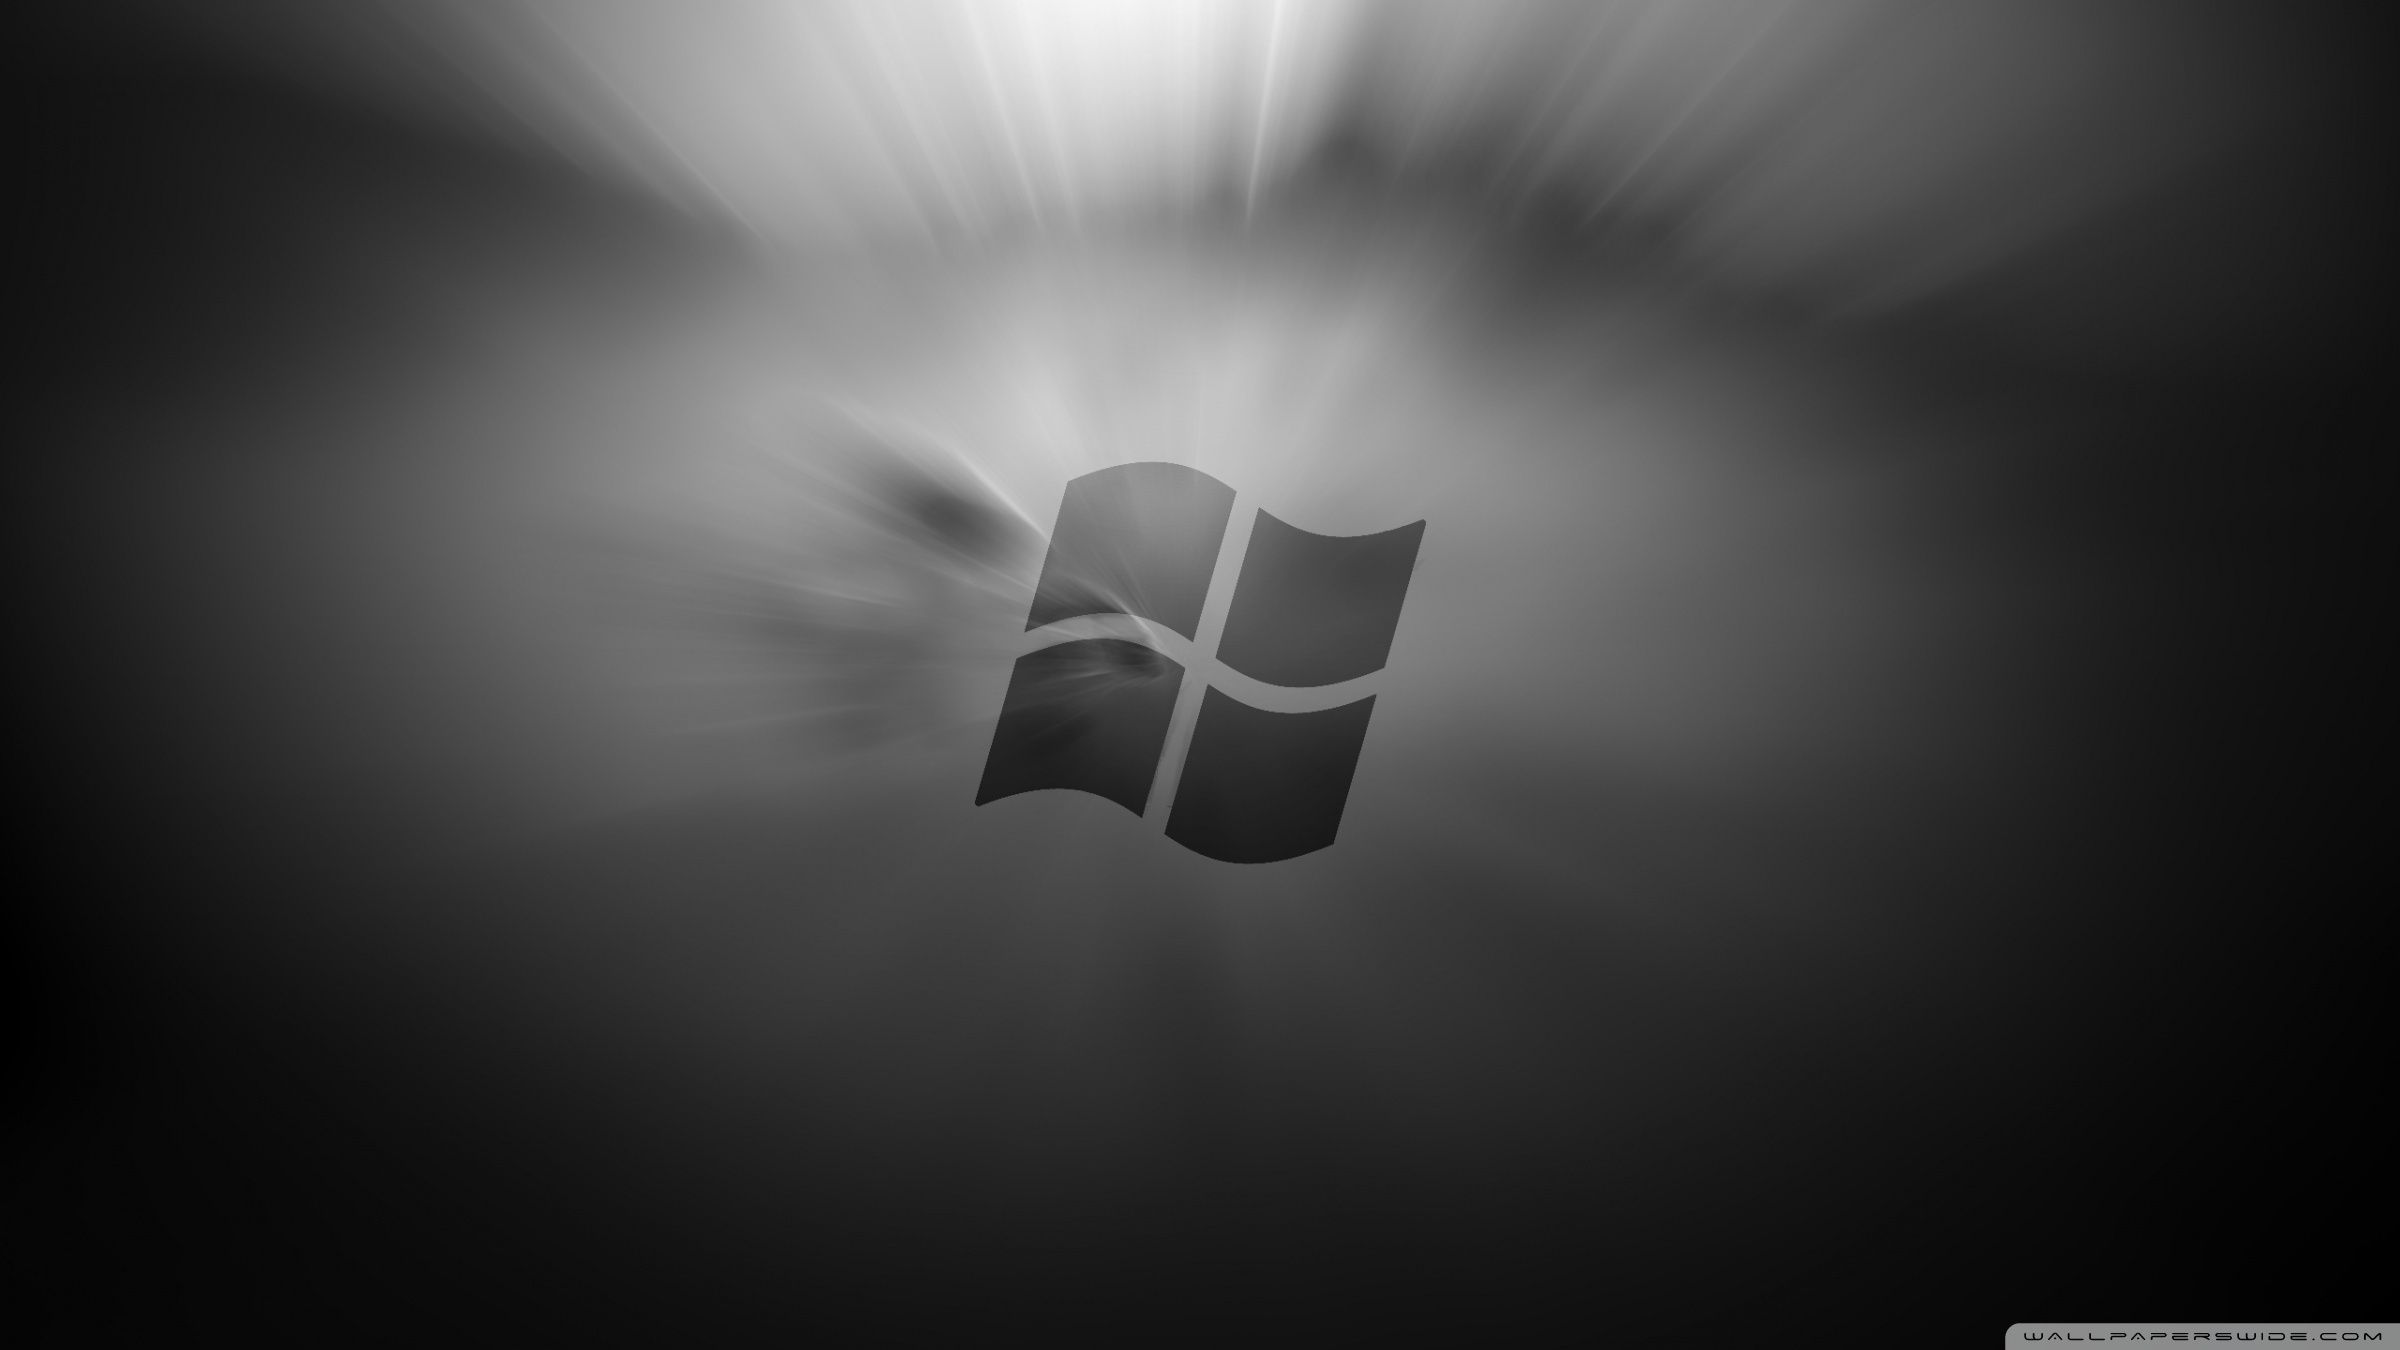 Windows 8 black theme wallpapers and images - wallpapers, pictures ...